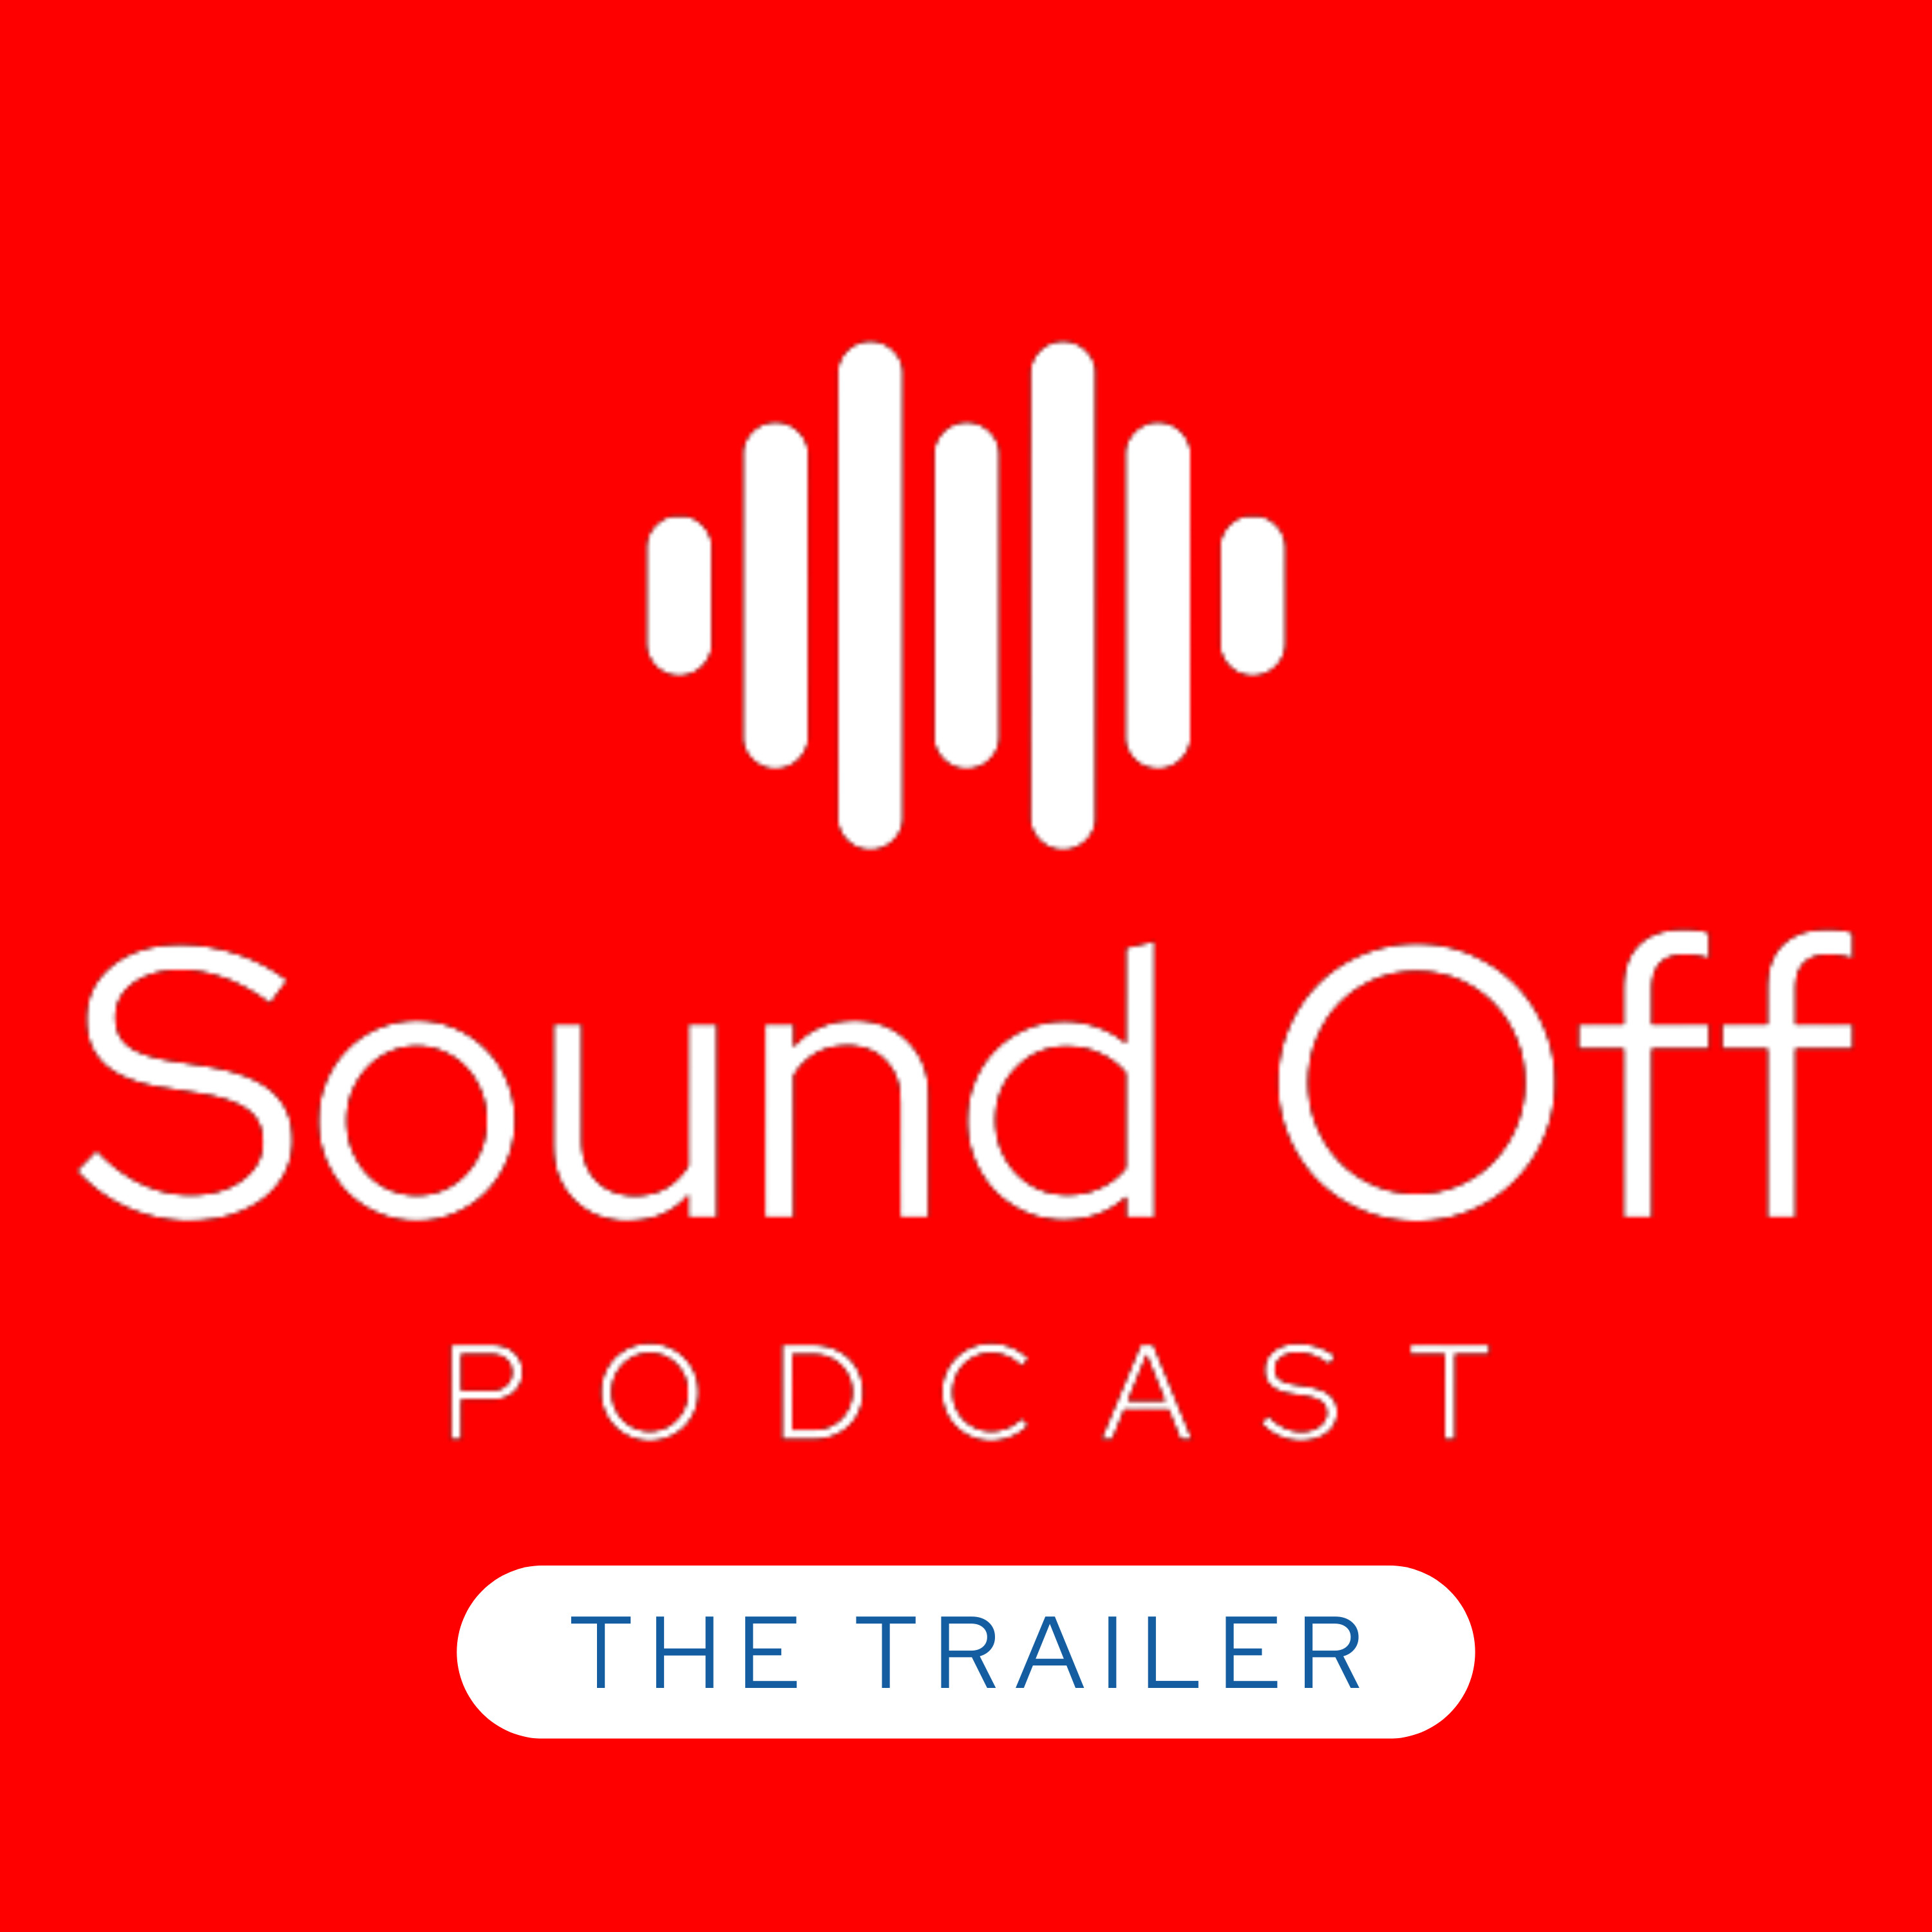 Welcome to the The Sound Off Podcast